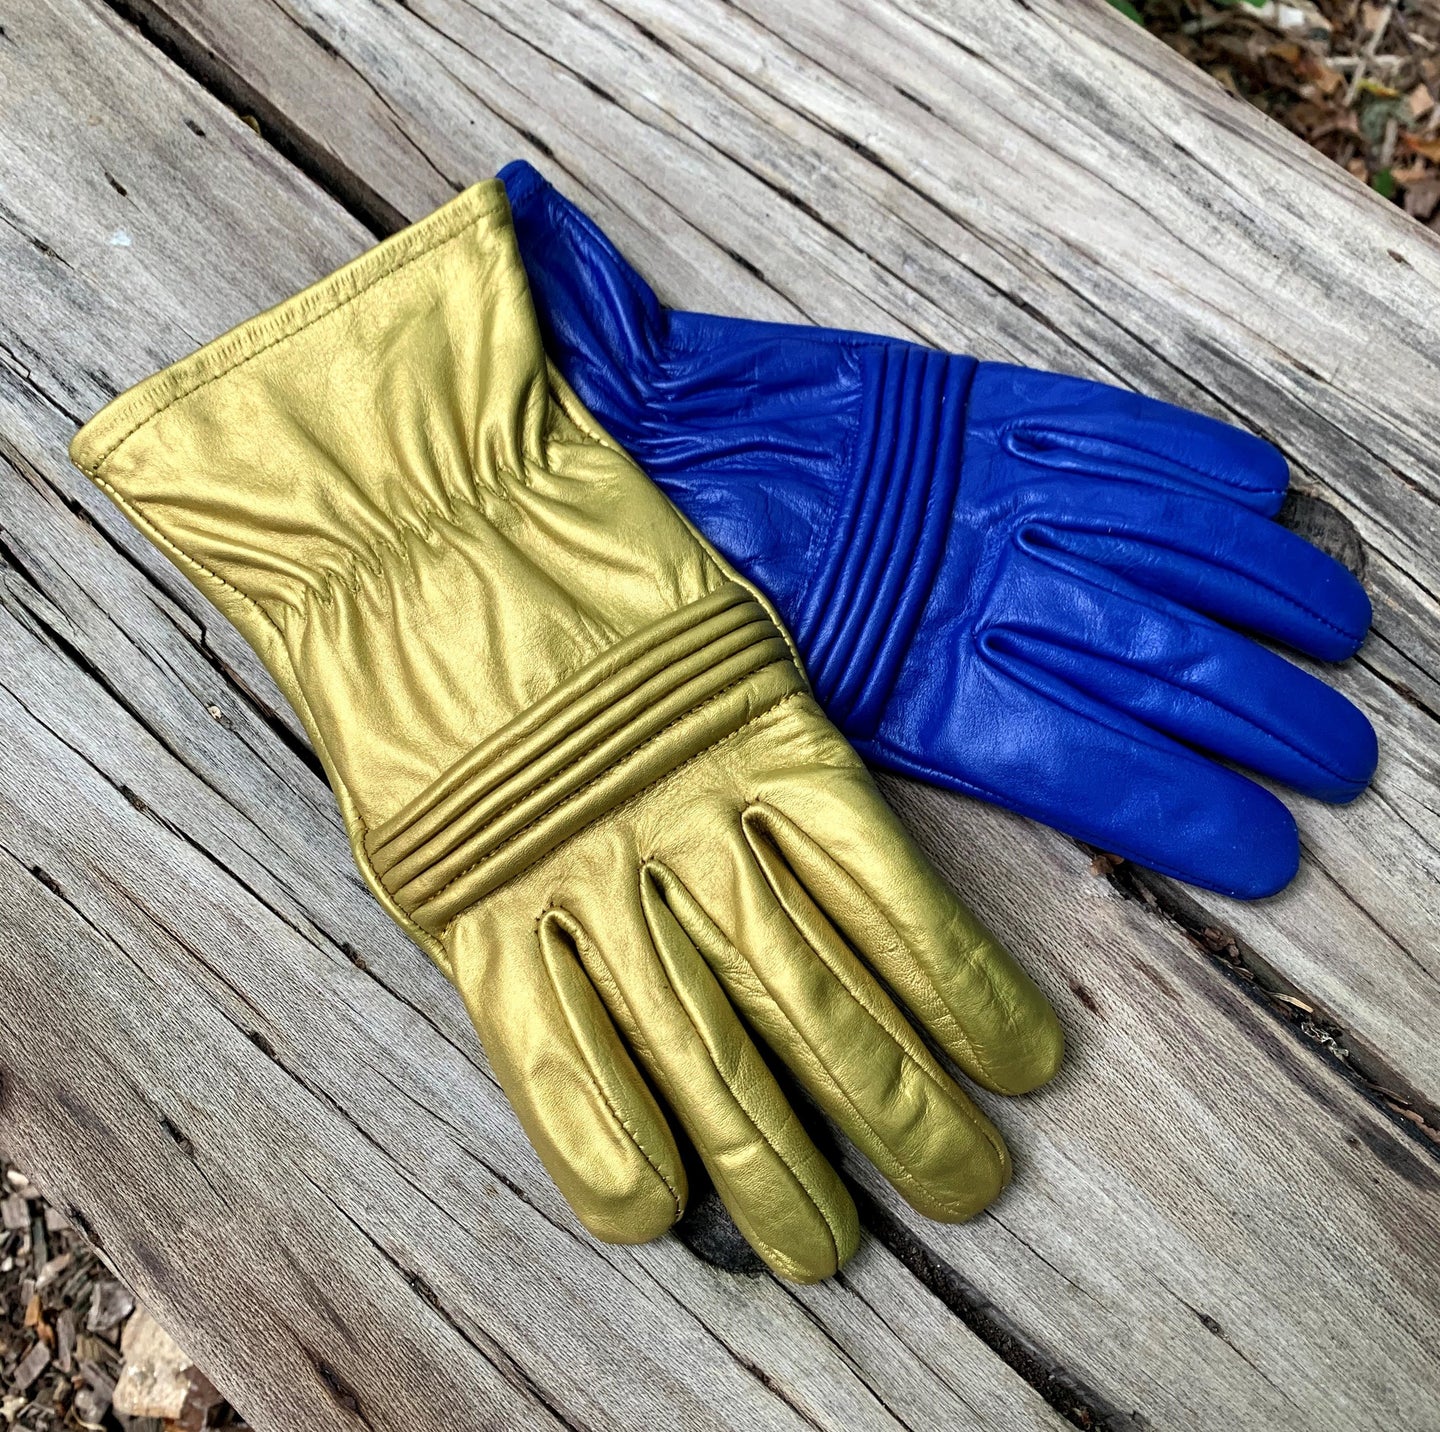 Rangers Dino Fury Gloves for Cosplay/Short gauntlet/Genuine Leather